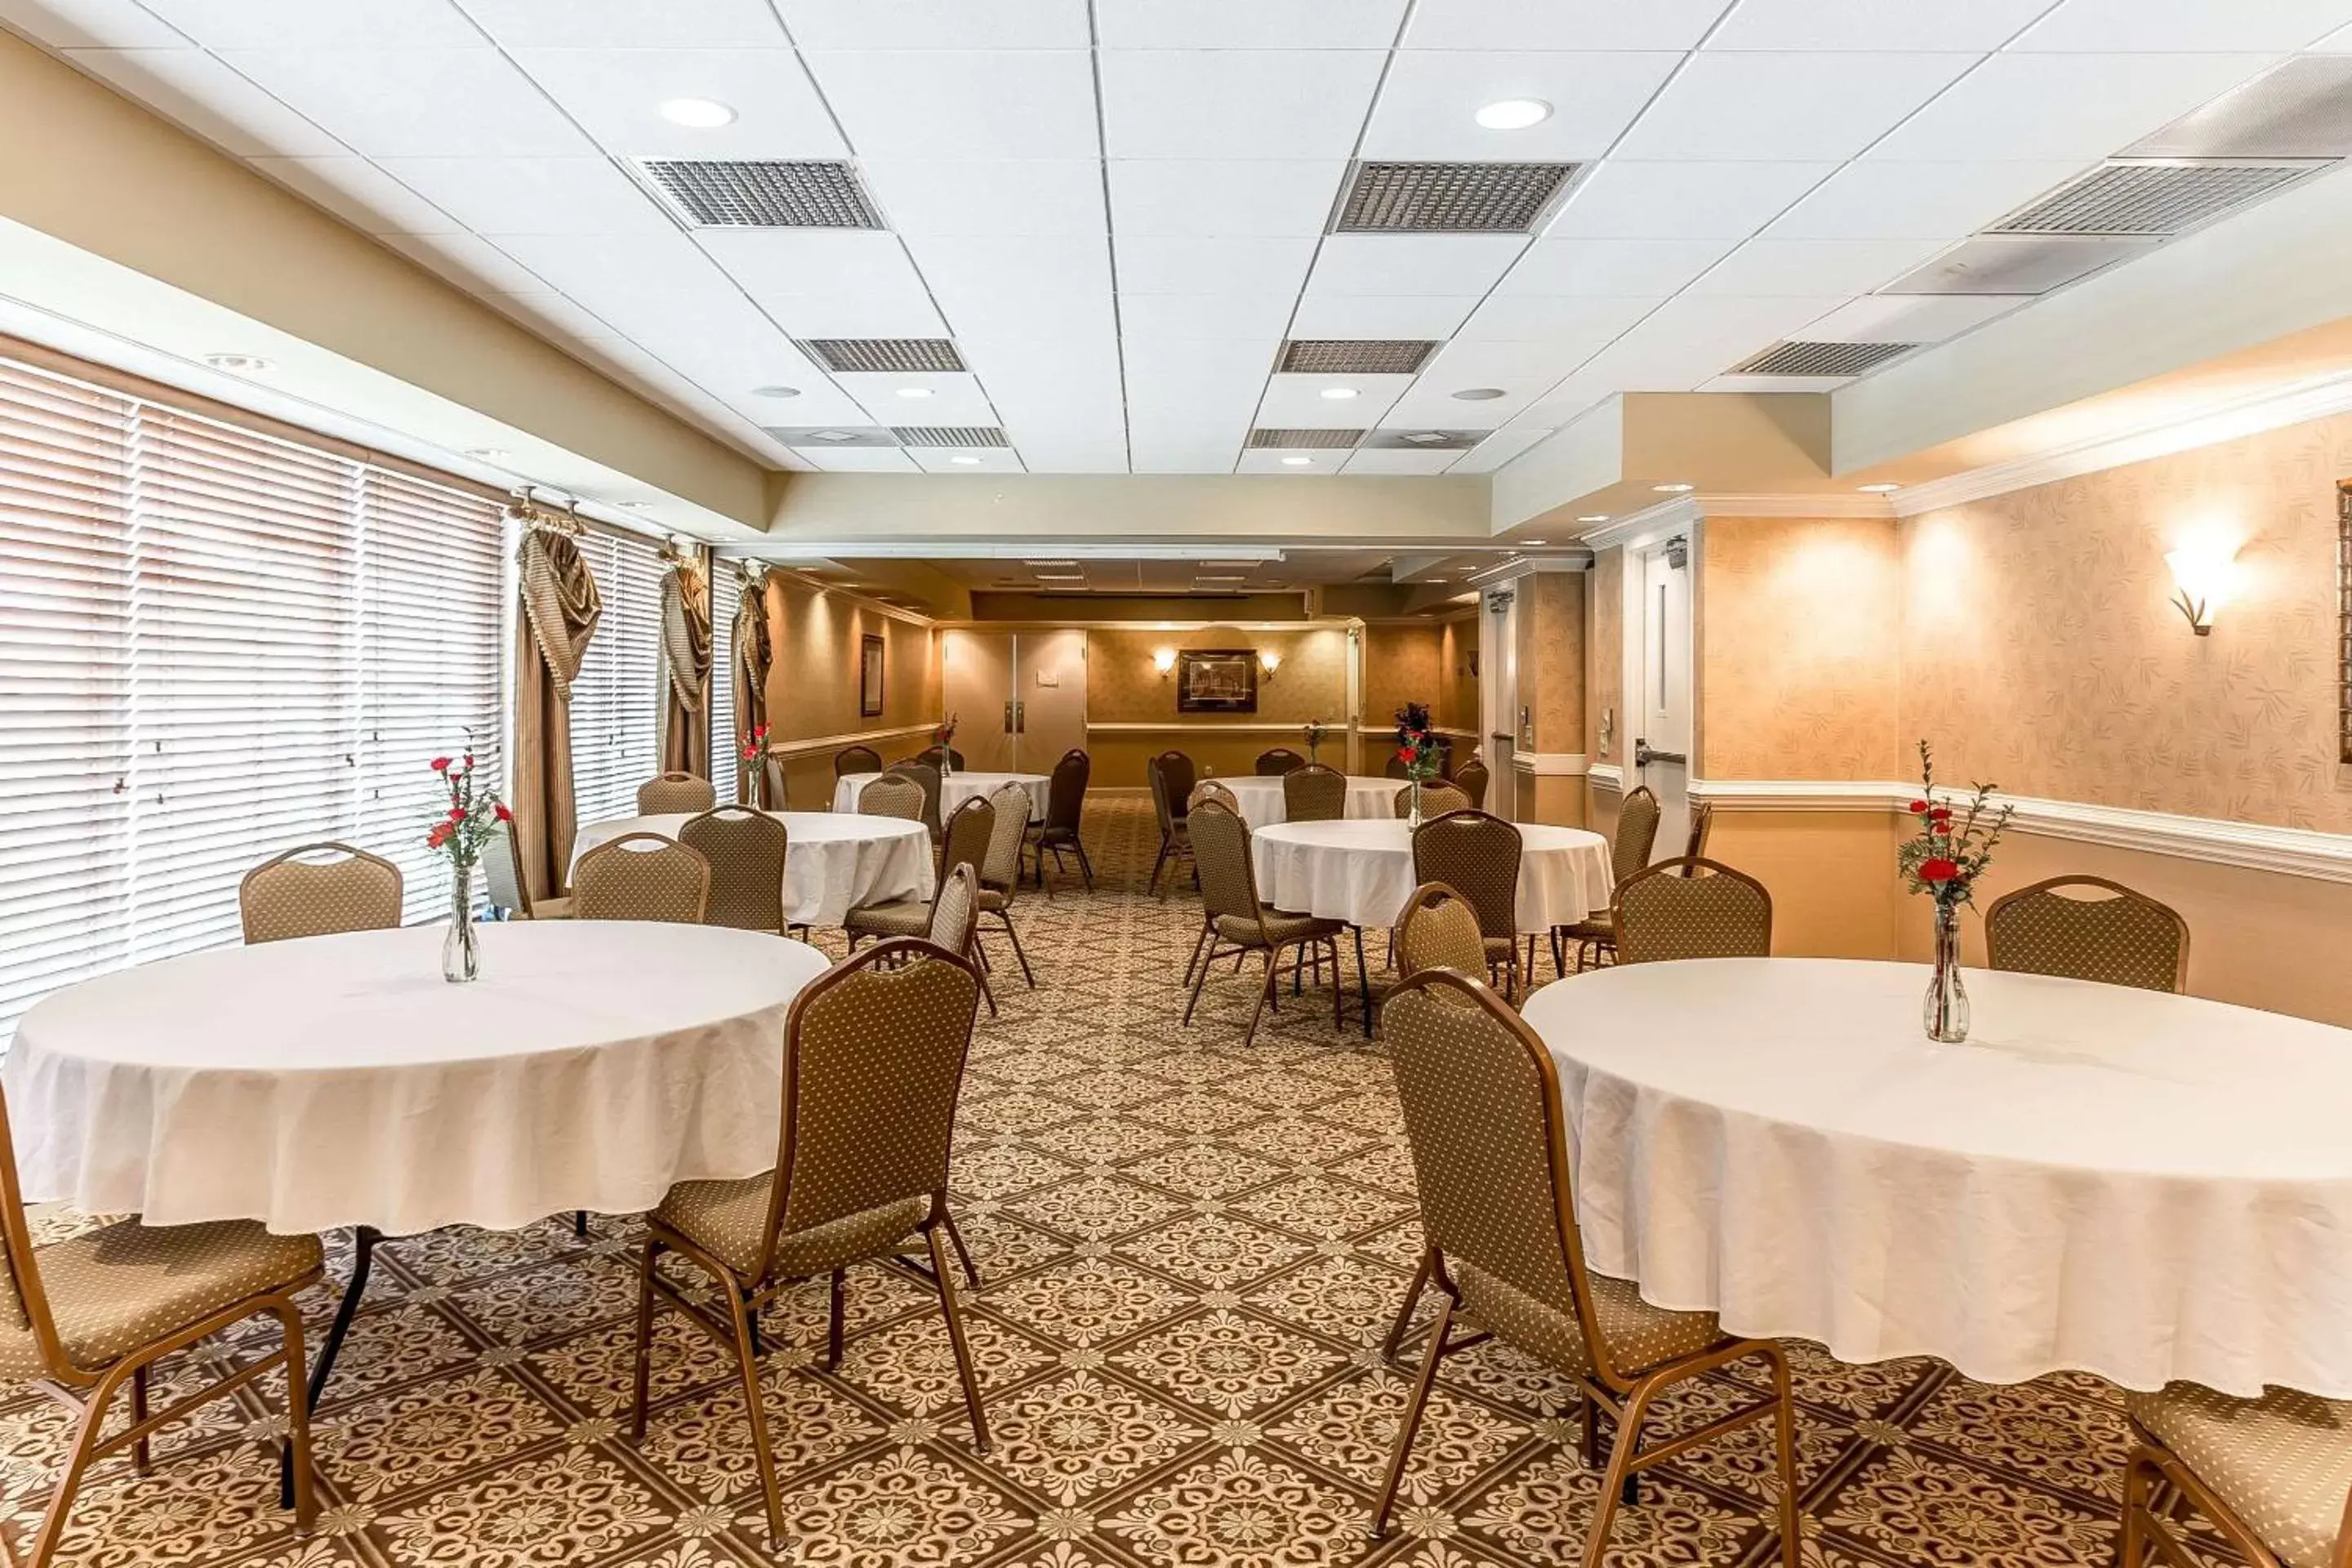 On site, Banquet Facilities in Quality Inn & Suites Georgetown